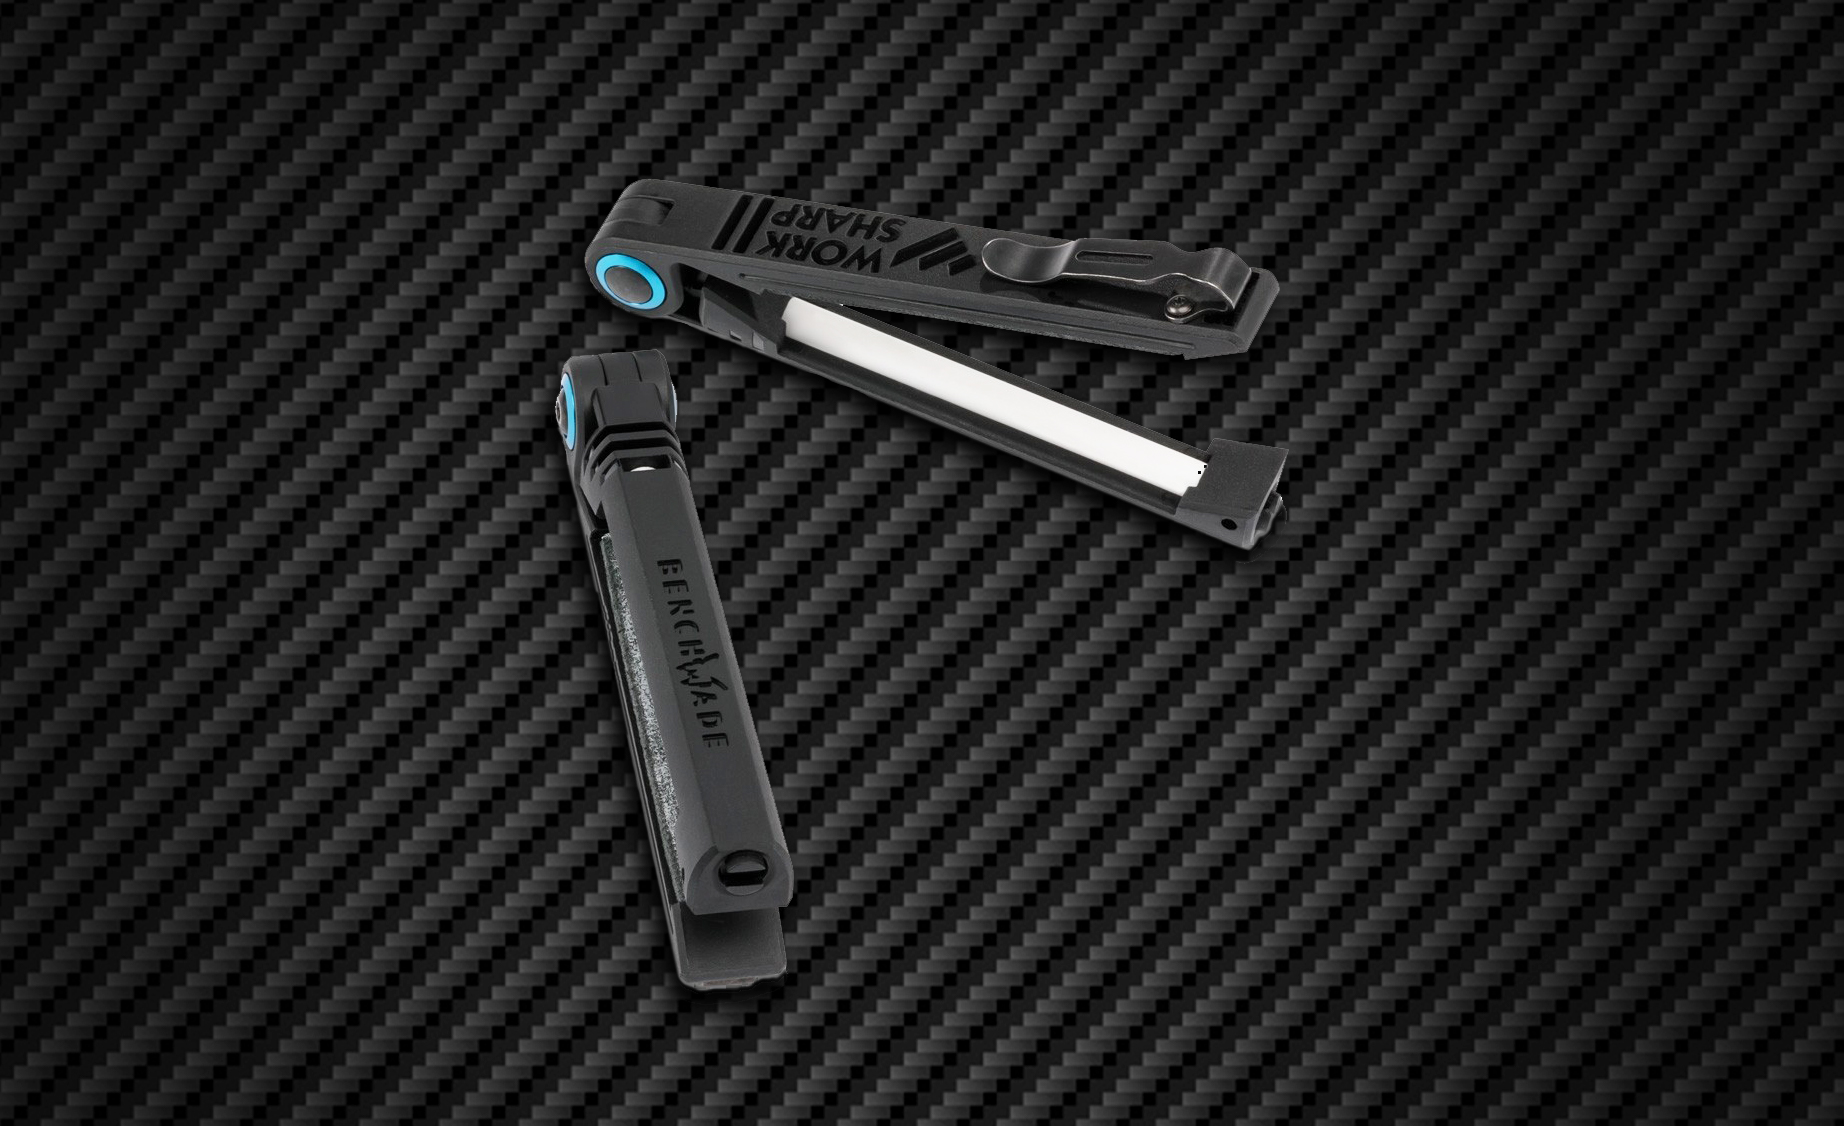 Benchmade Partners with Work Sharp for EDC Sharpener